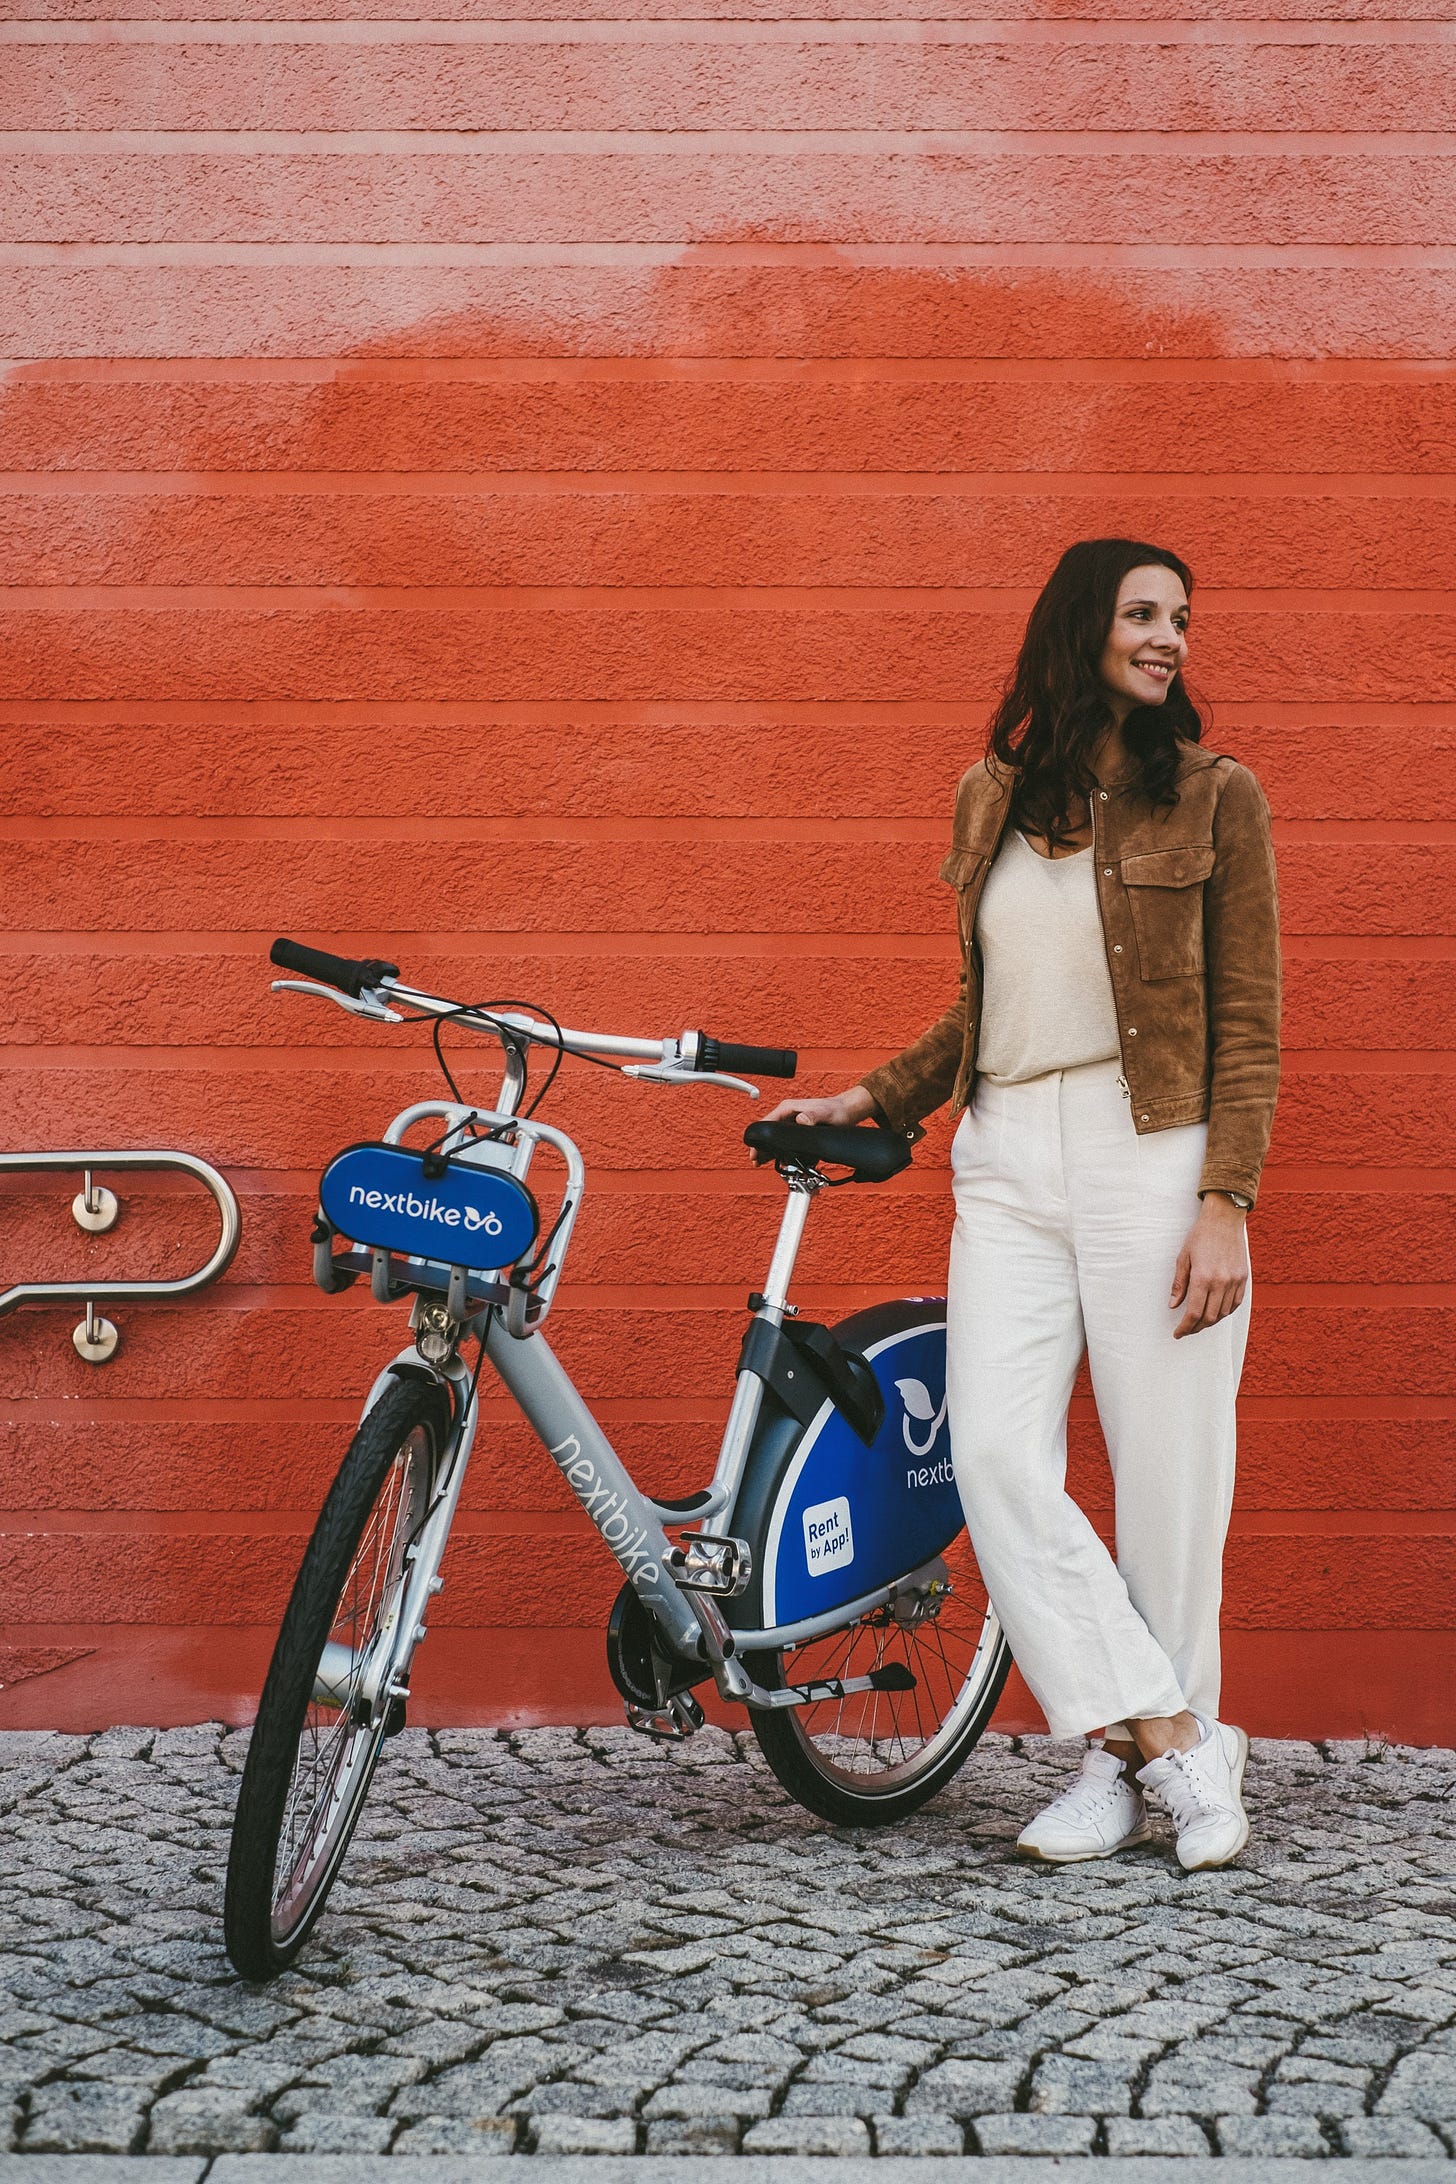 Woman standing next to a bike from a bike-sharing company